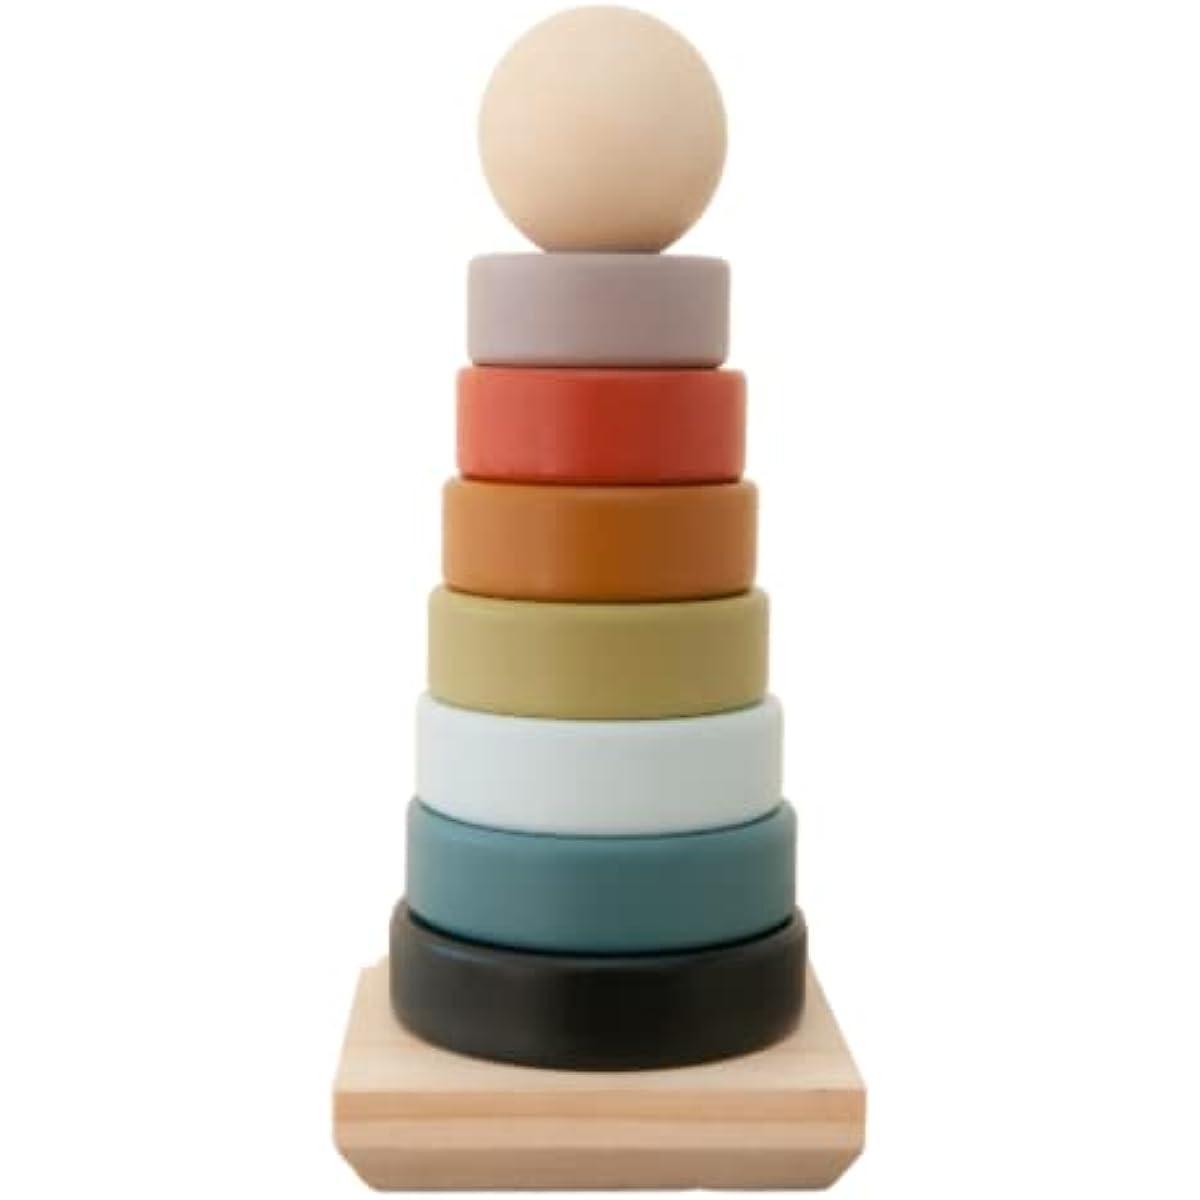 Classic Wooden Ring Stacker Toy